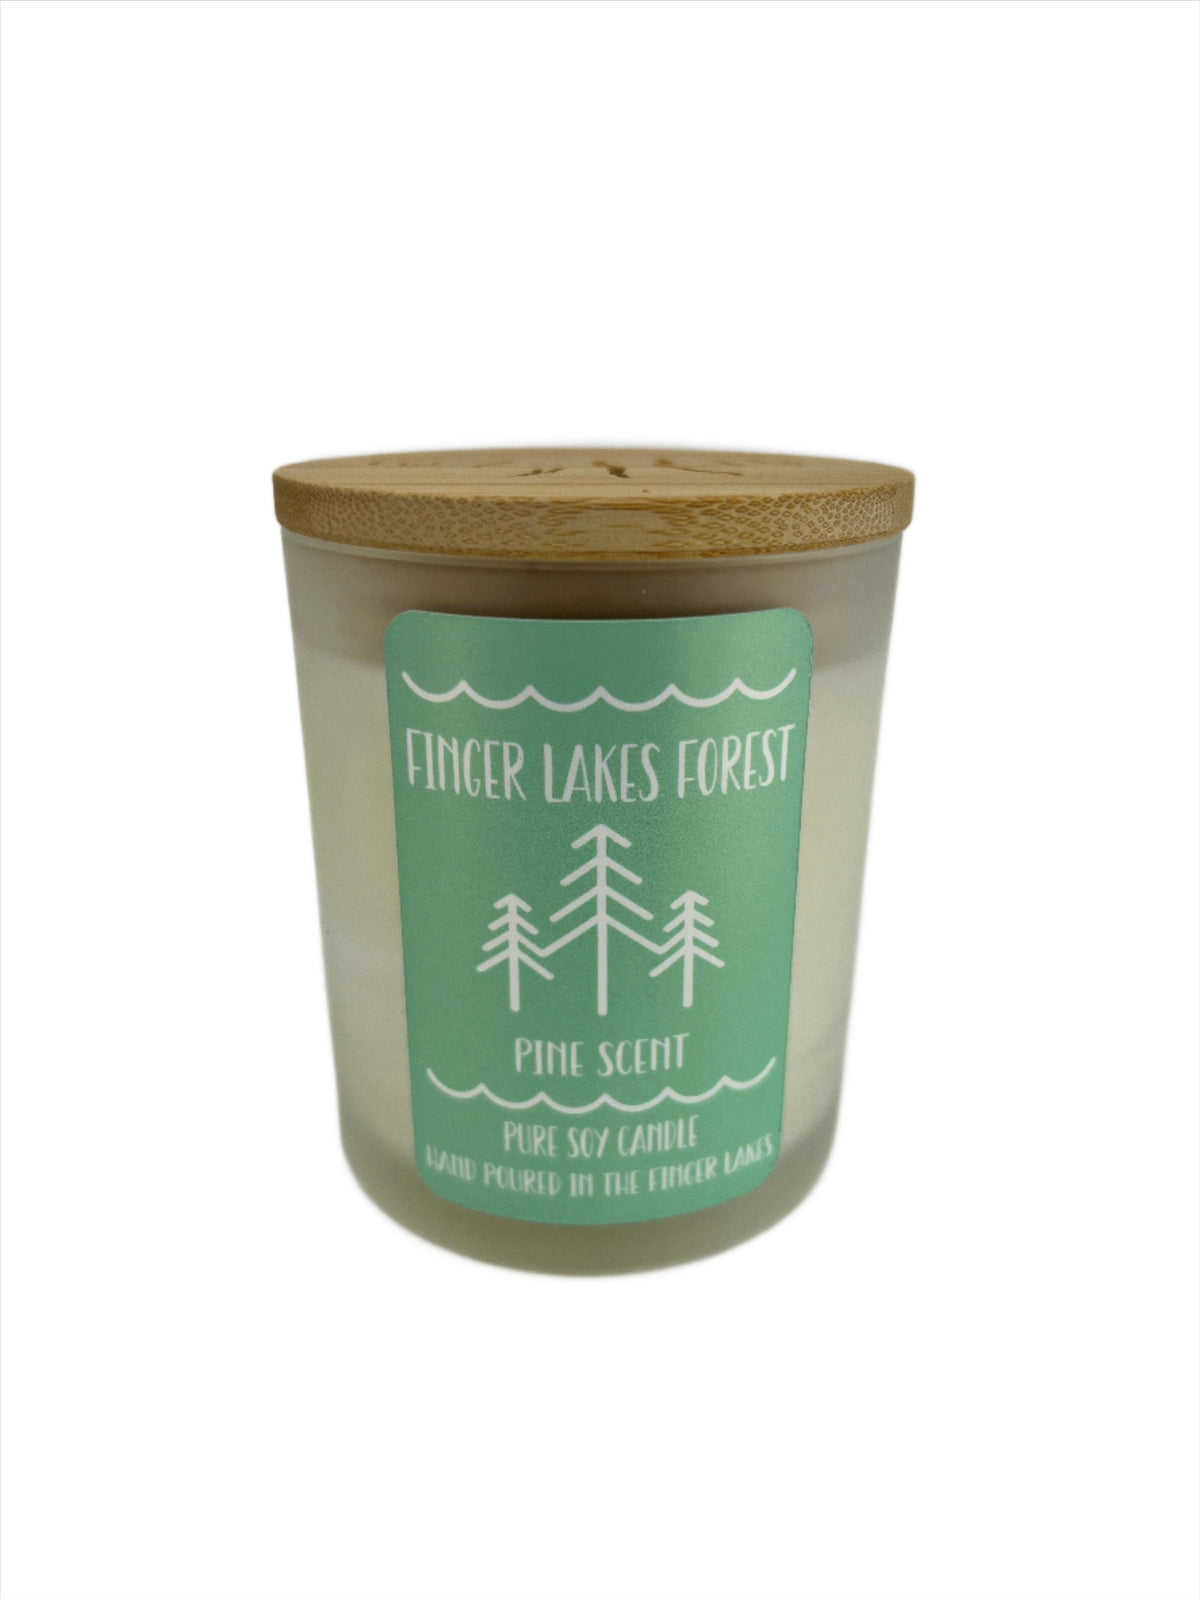 Eleven Lakes Market x AnnaMarri Soy Candles